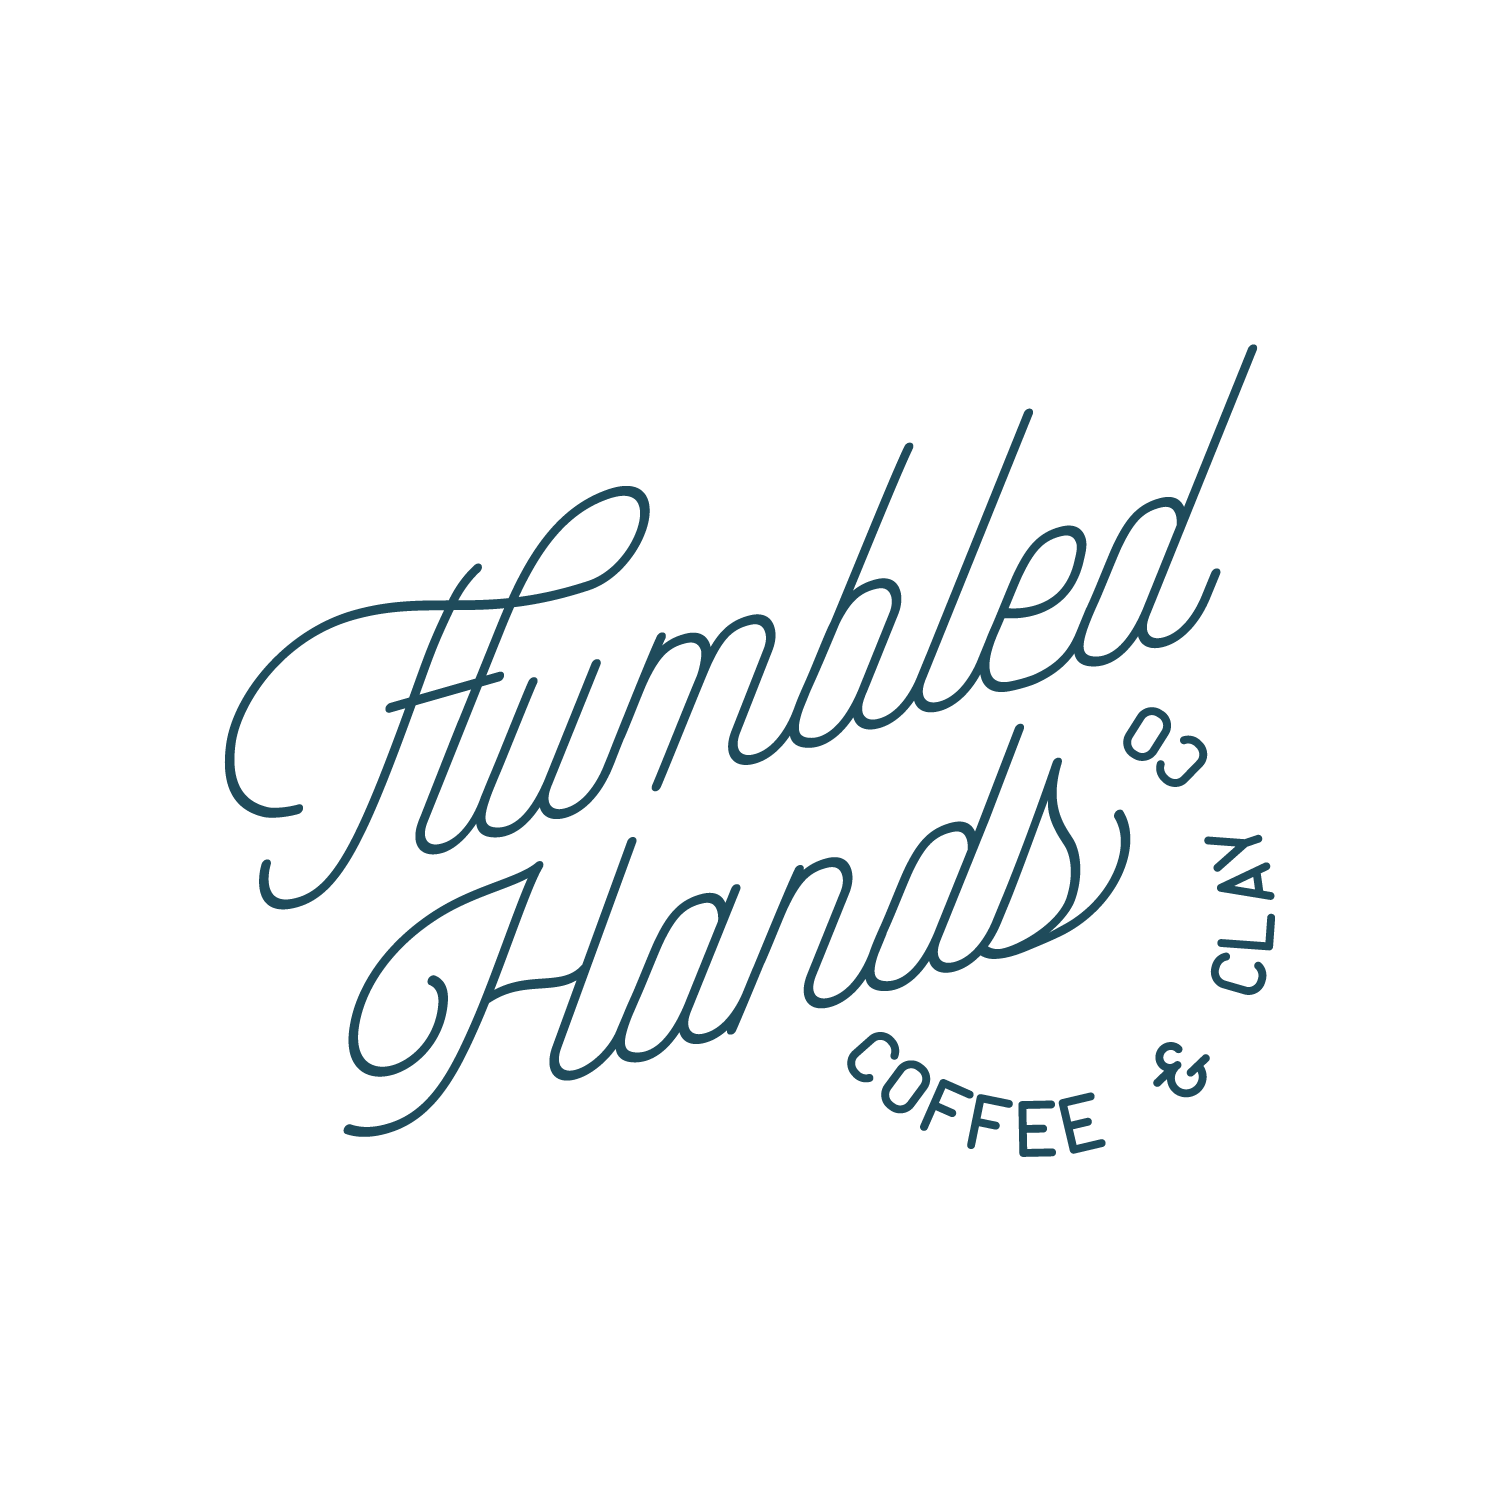 Humbled Hands Coffee and Clay Co.